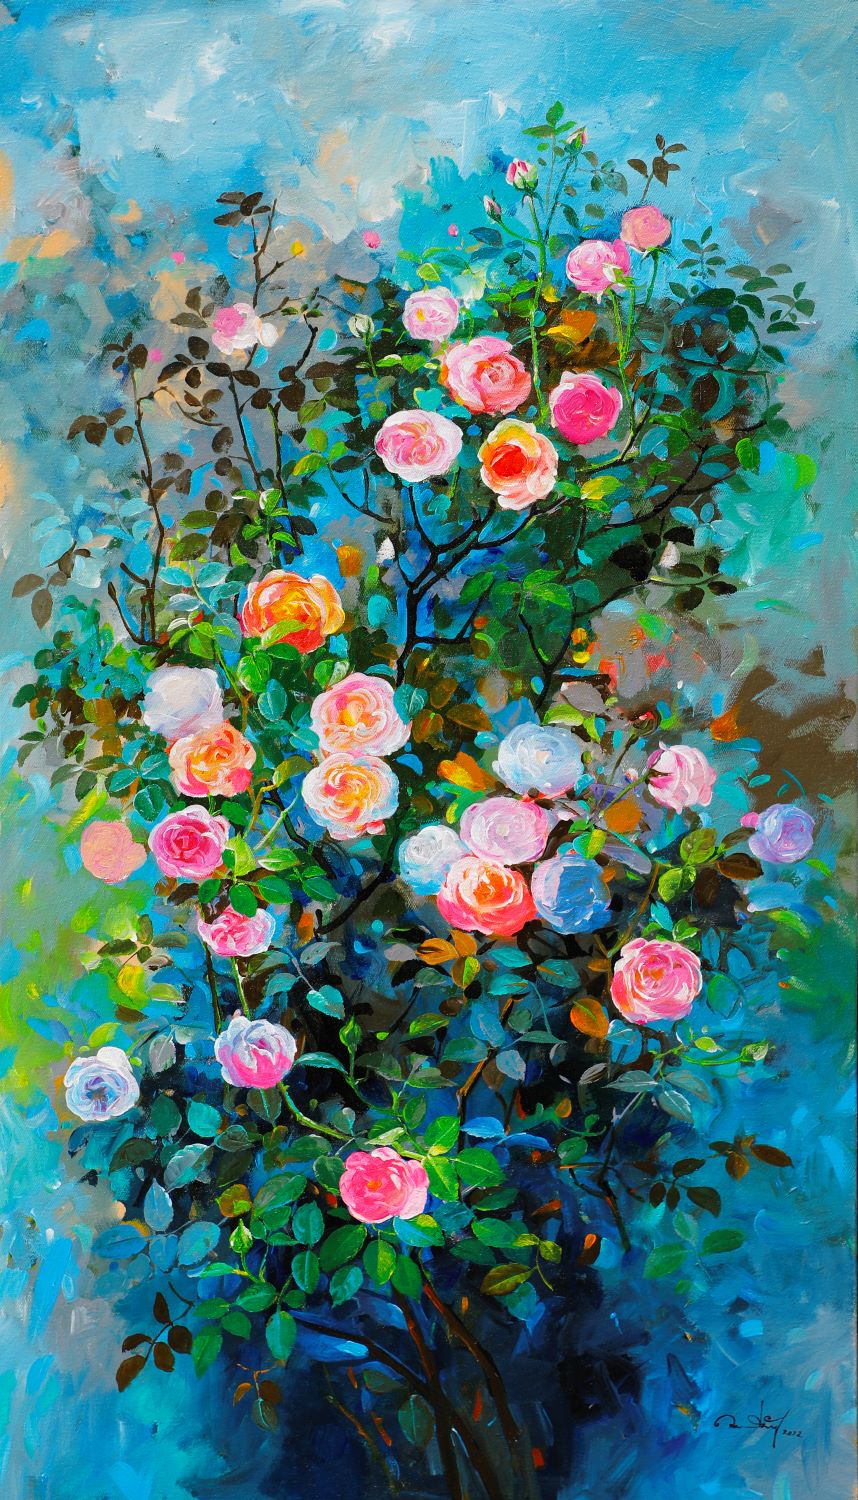 Roses XII - Vietnamese Oil Painting Flower by Artist An Dang